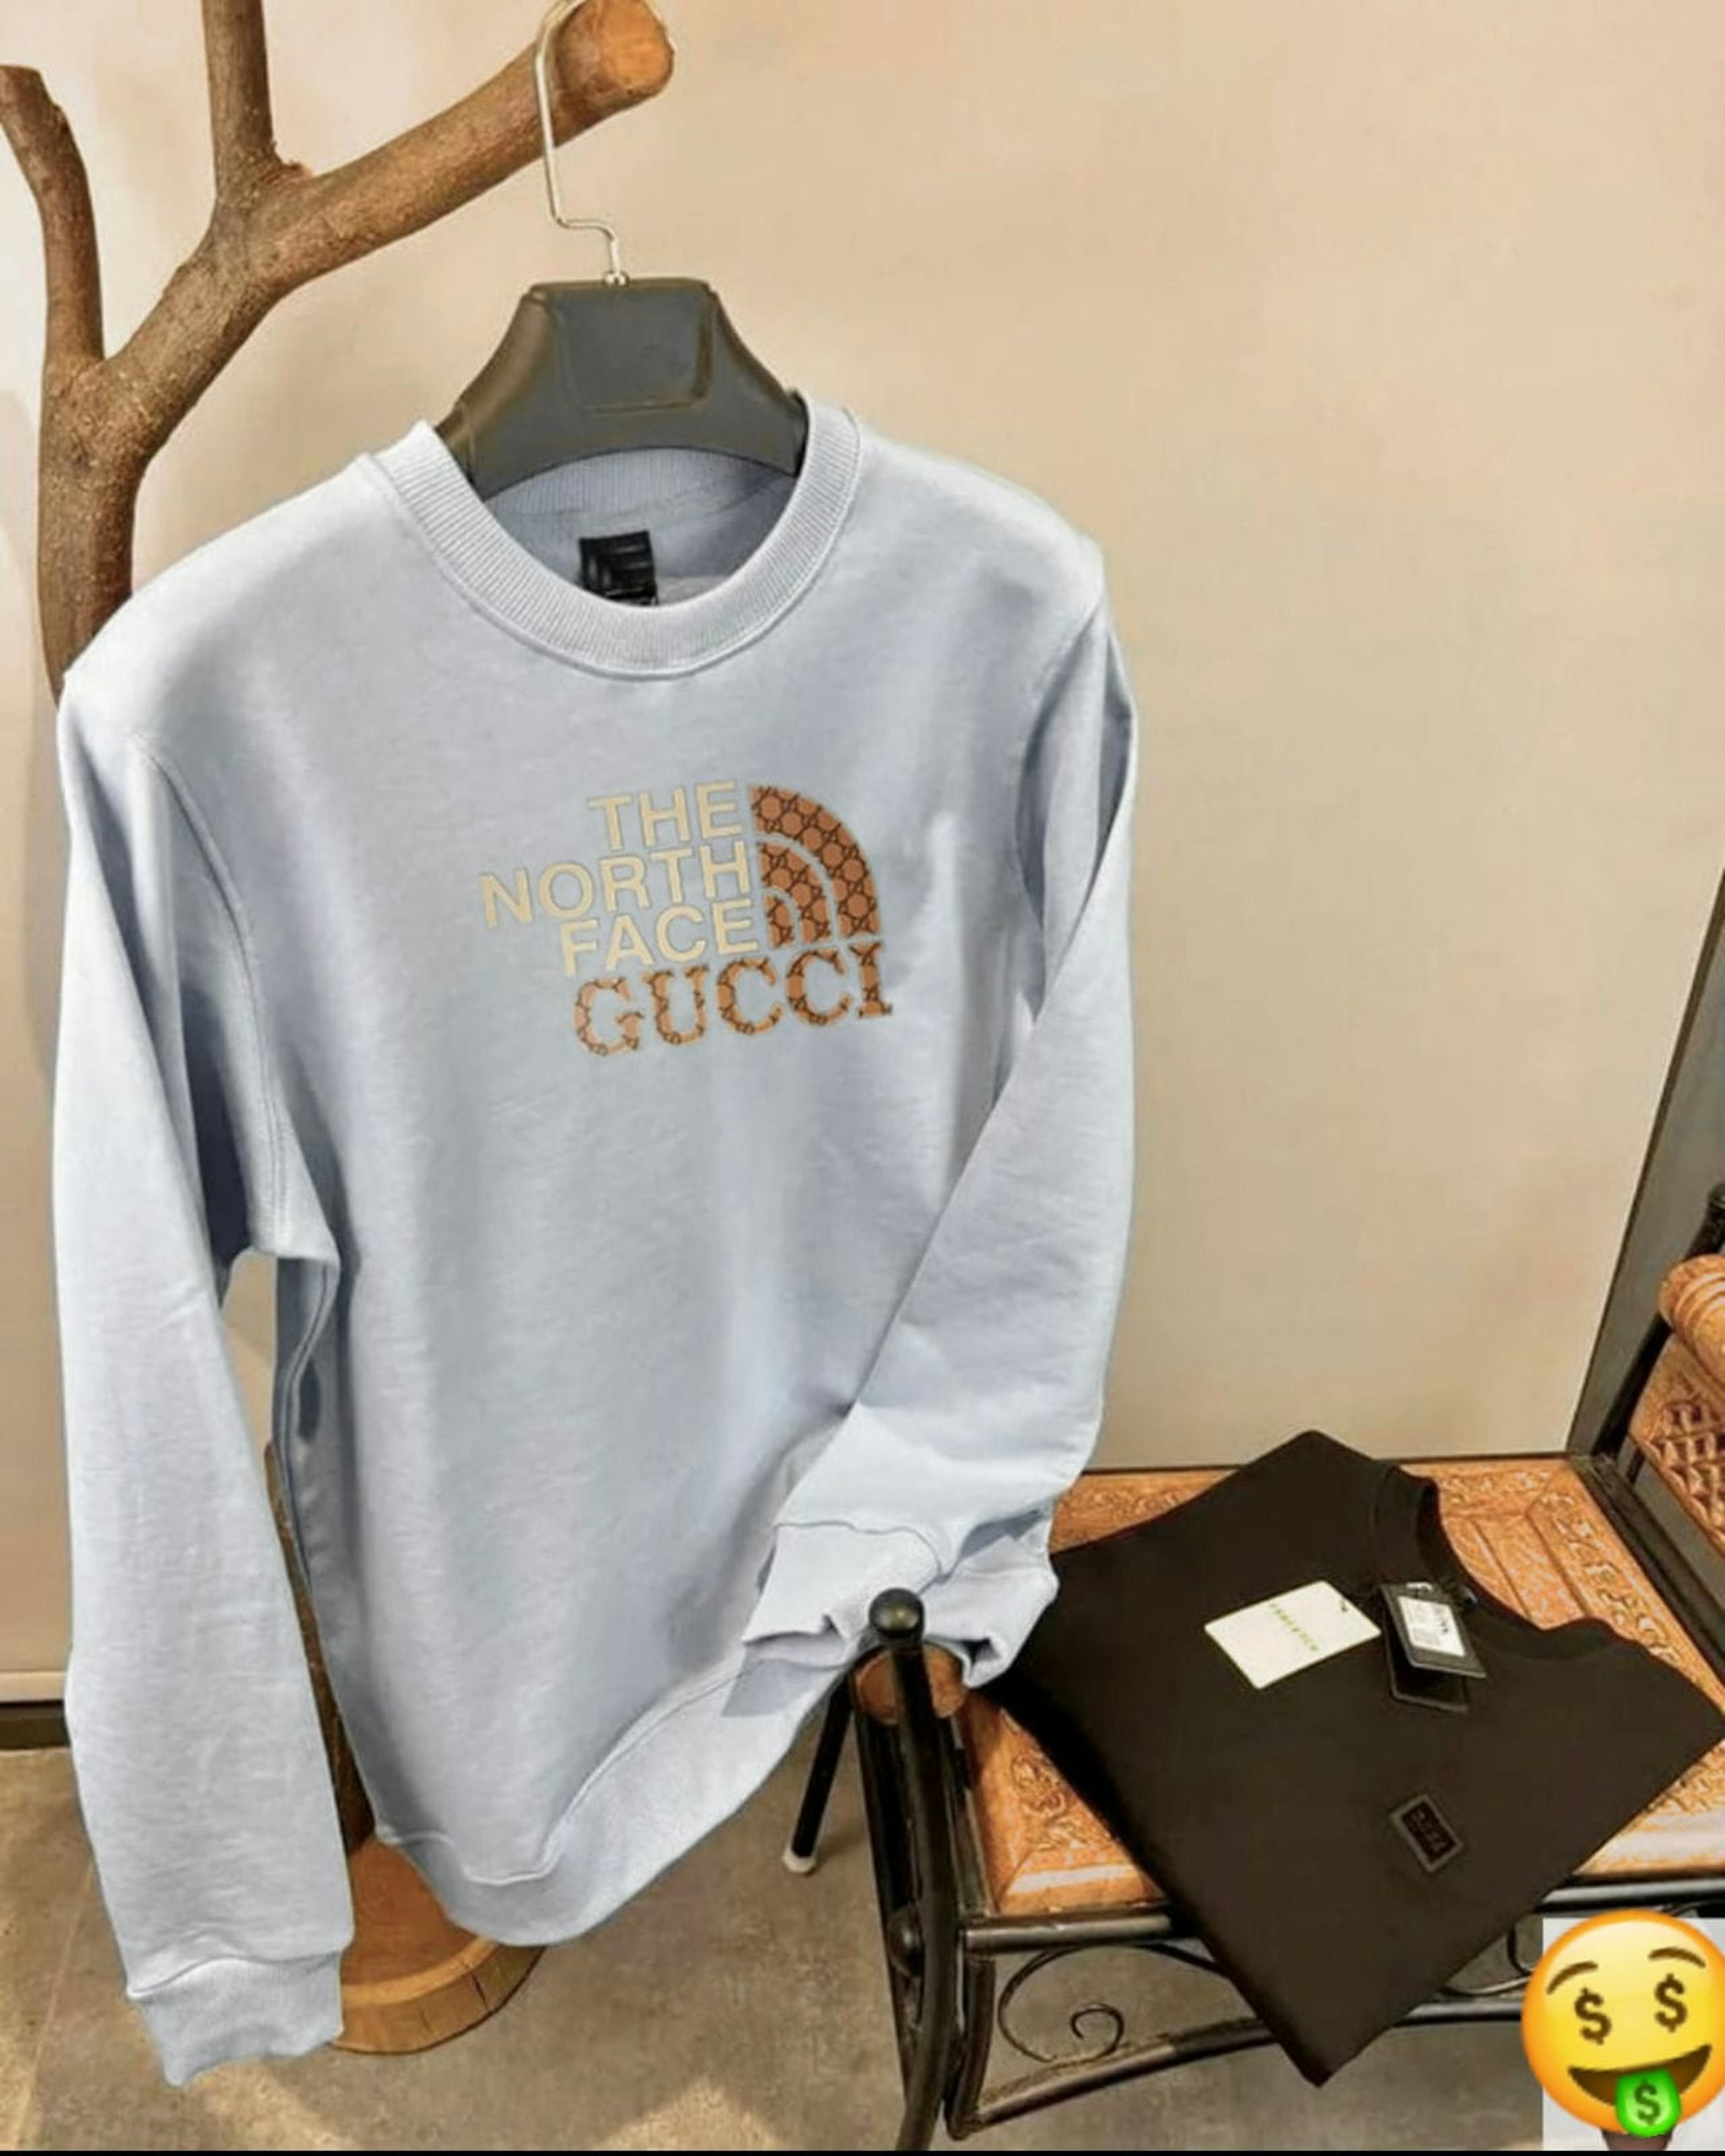 View - GUCCI t-shirt photos, GUCCI t-shirt available in Surat, make deal in 1230